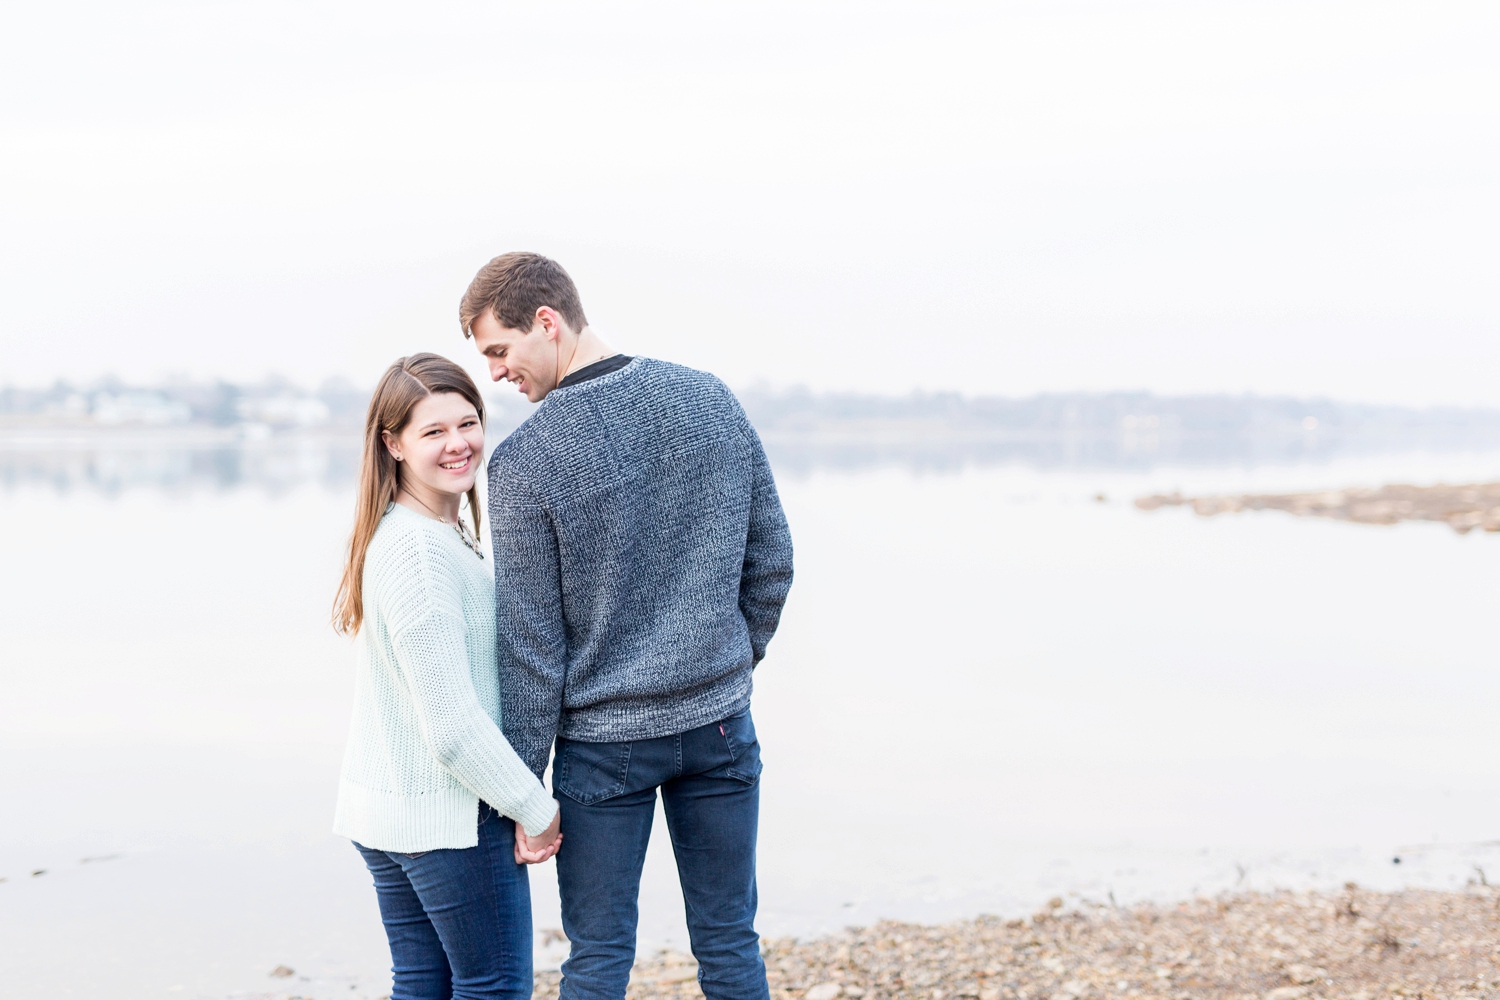 engagement-photos-at-hoover-dam-in-westerville-ohio_0305